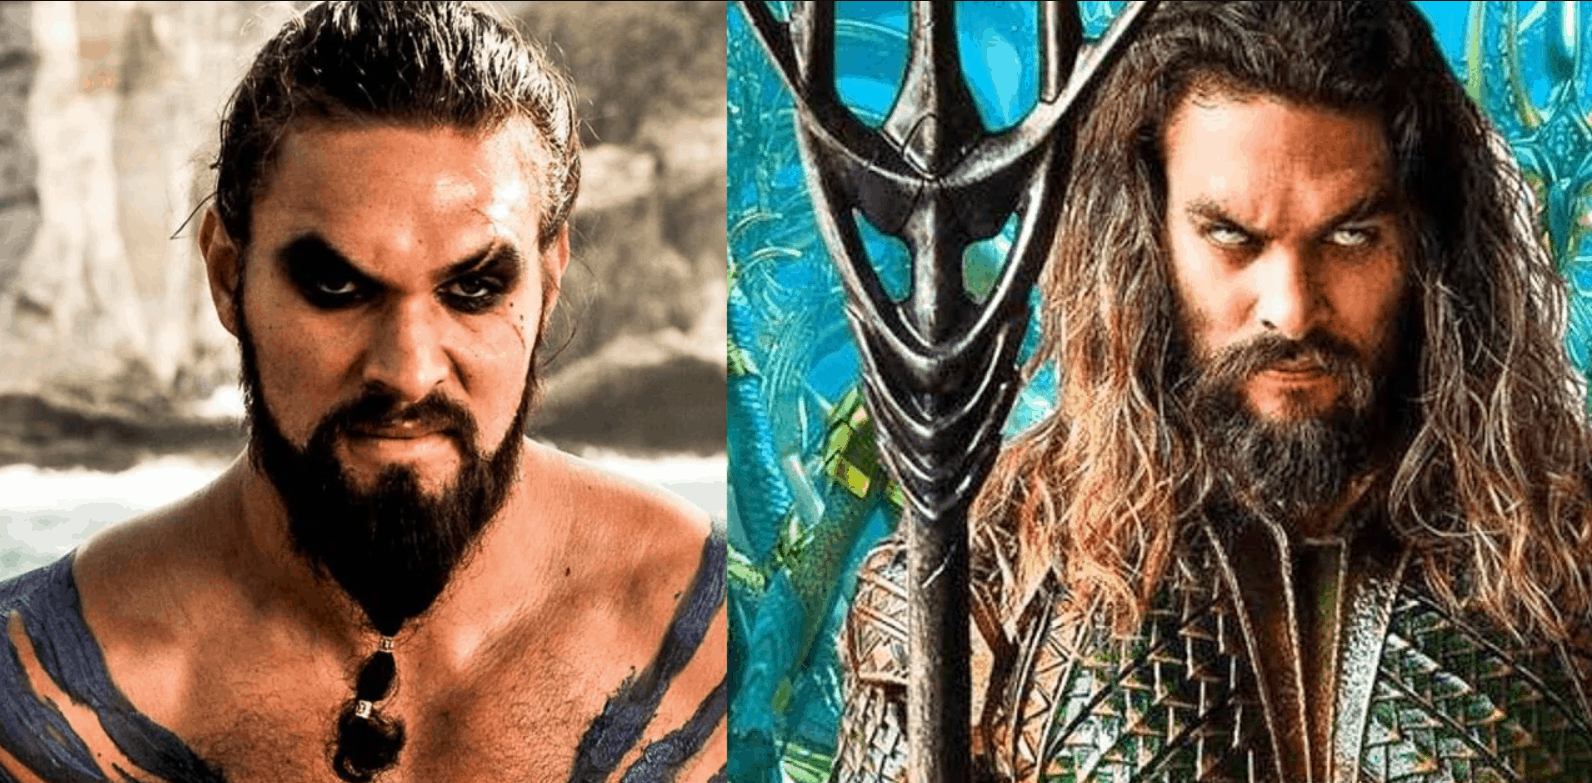 Jason Momoa Reveals his hard life after Game of Thrones – We were starving